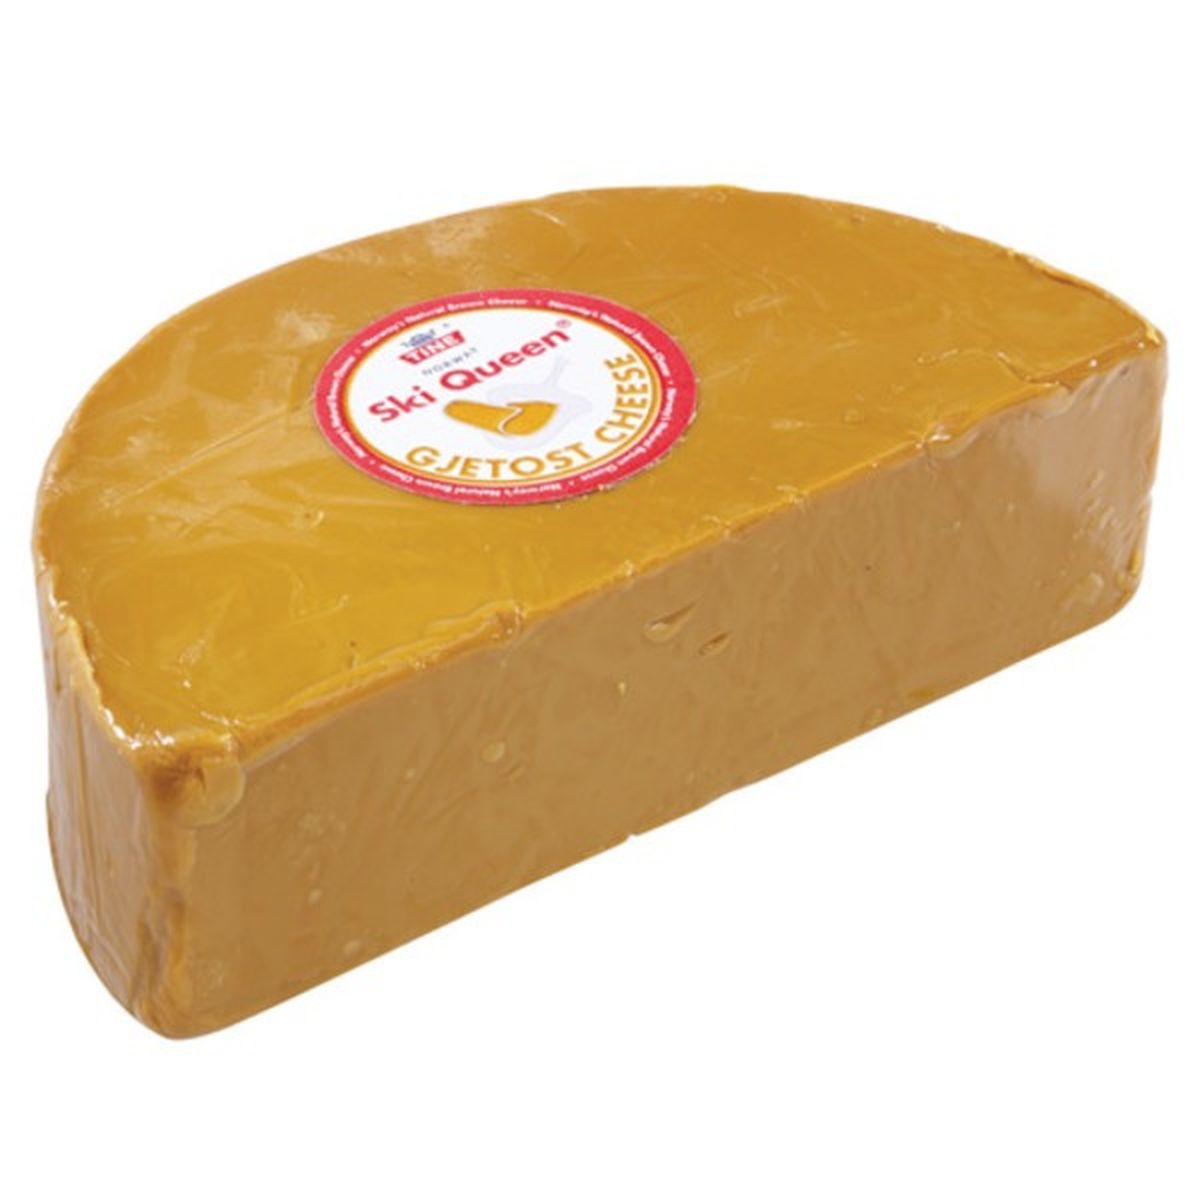 Calories in Gjetost Cheese